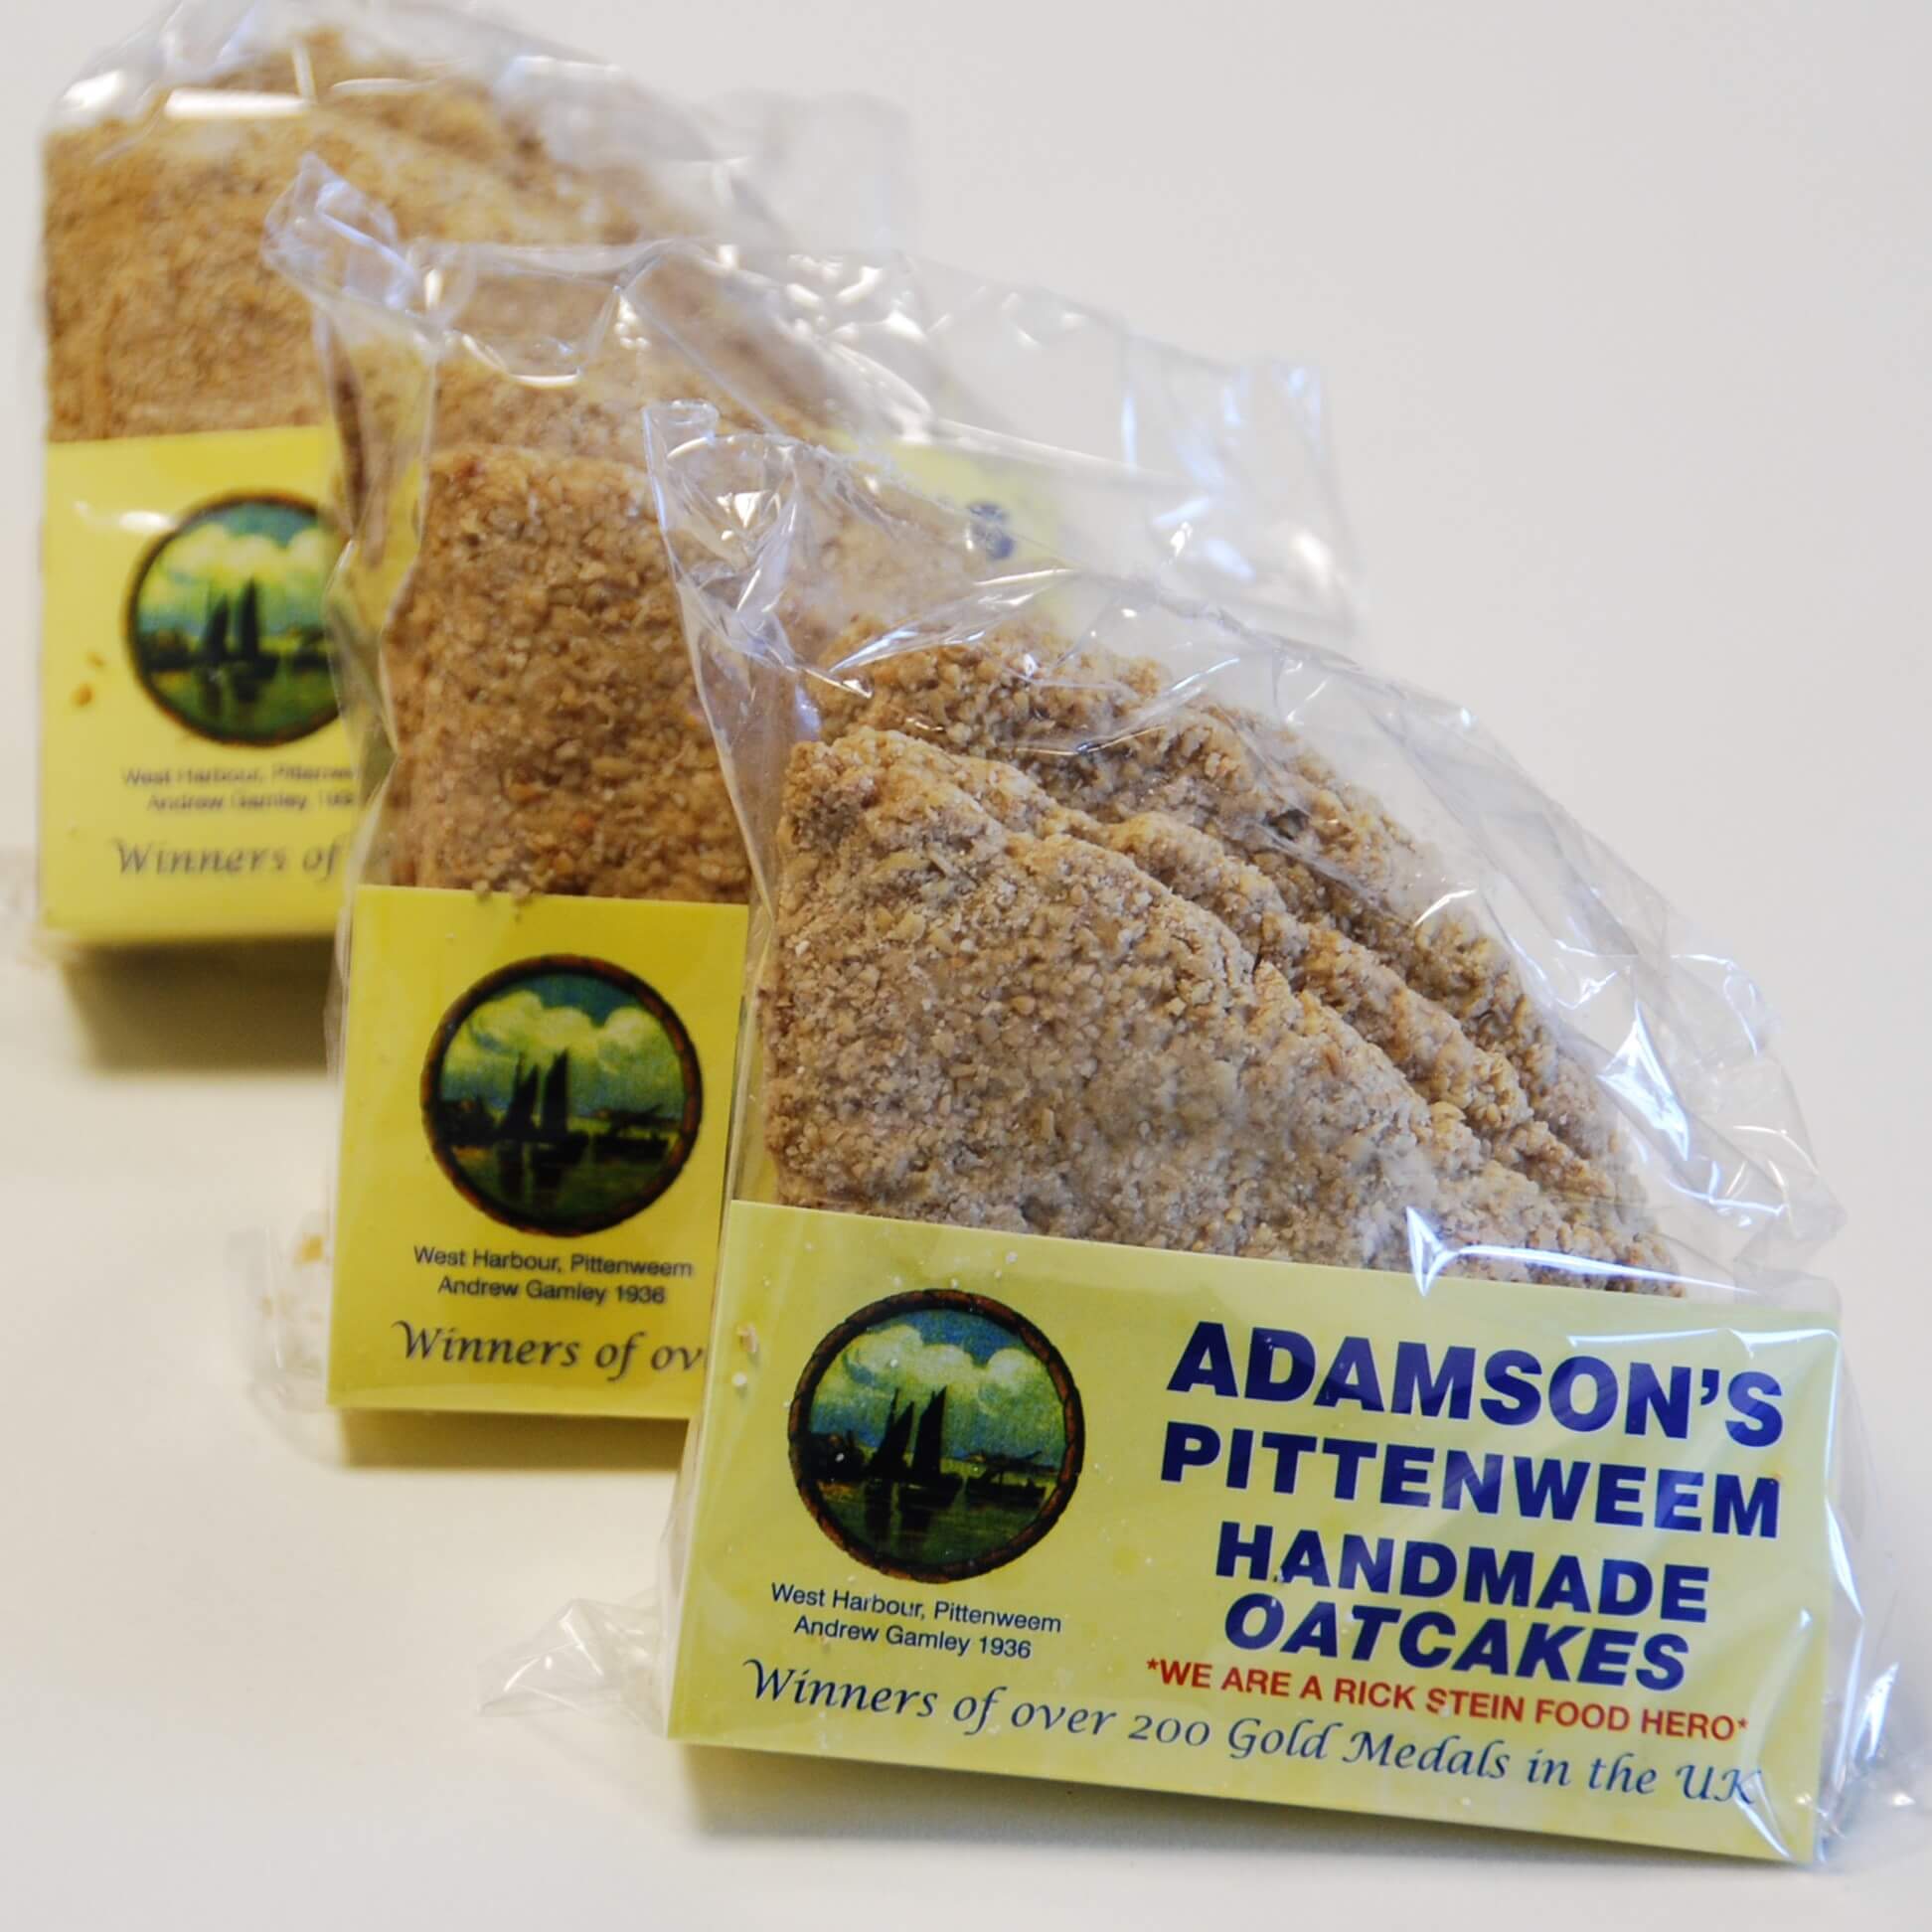 Image of Oatcakes made in the UK by Adamson's of Pittenweem. Buying this product supports a UK business, jobs and the local community